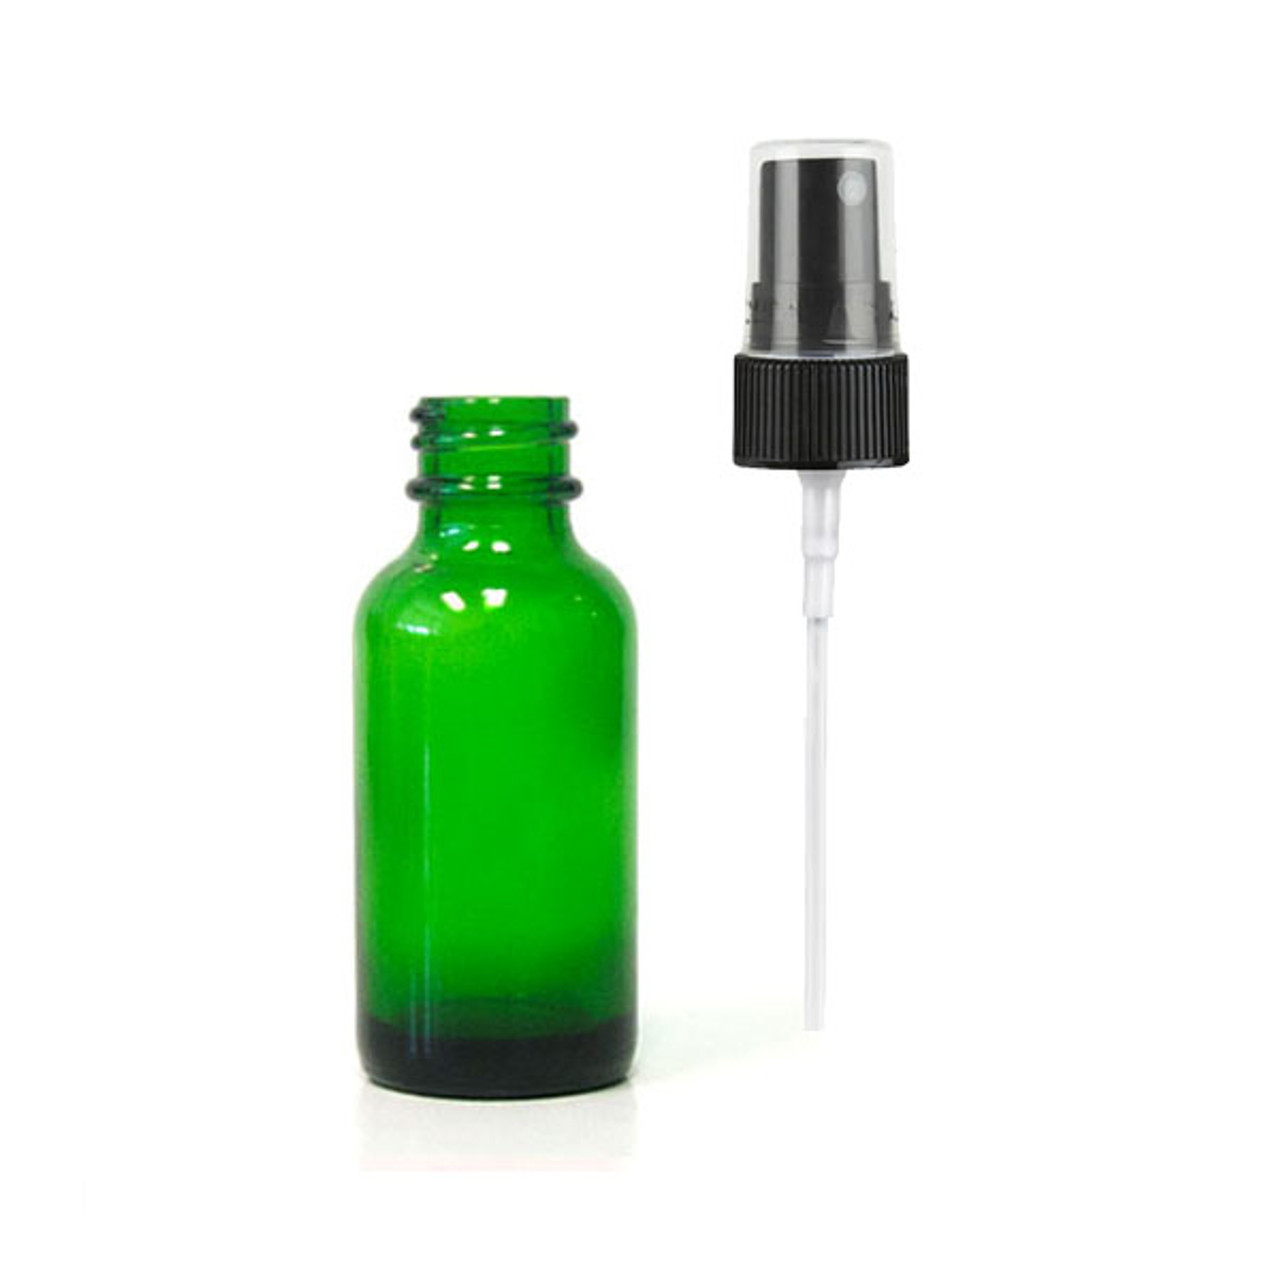 200ml round green travel refillable perfume bottle with black plastic  atomiser spray/mist, glass 200ml perfume container 200ml